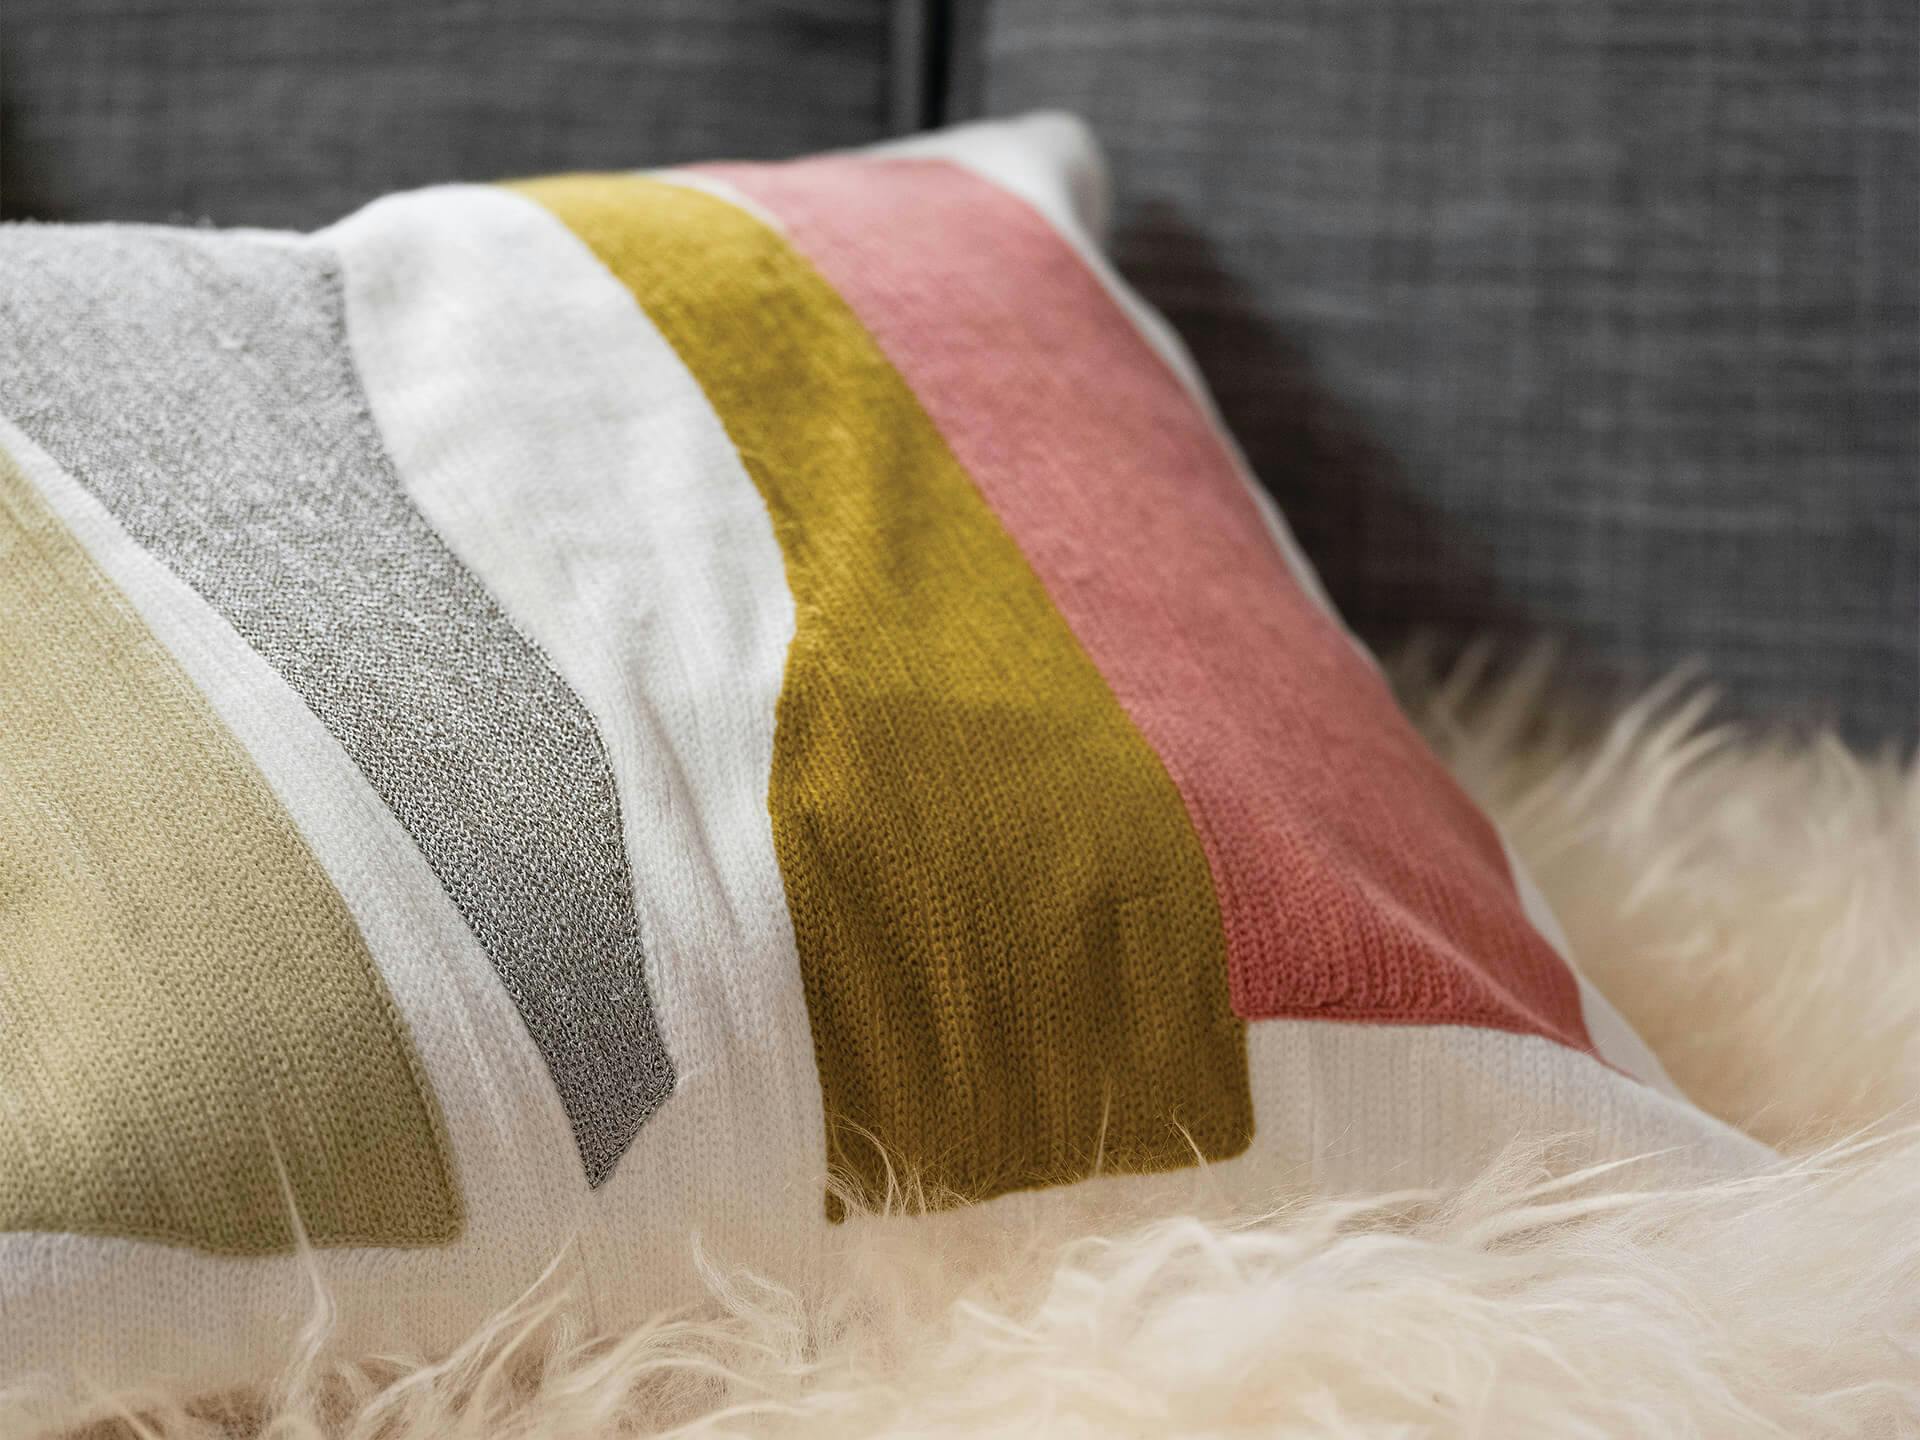 Close up of a colorful pillow on a couch